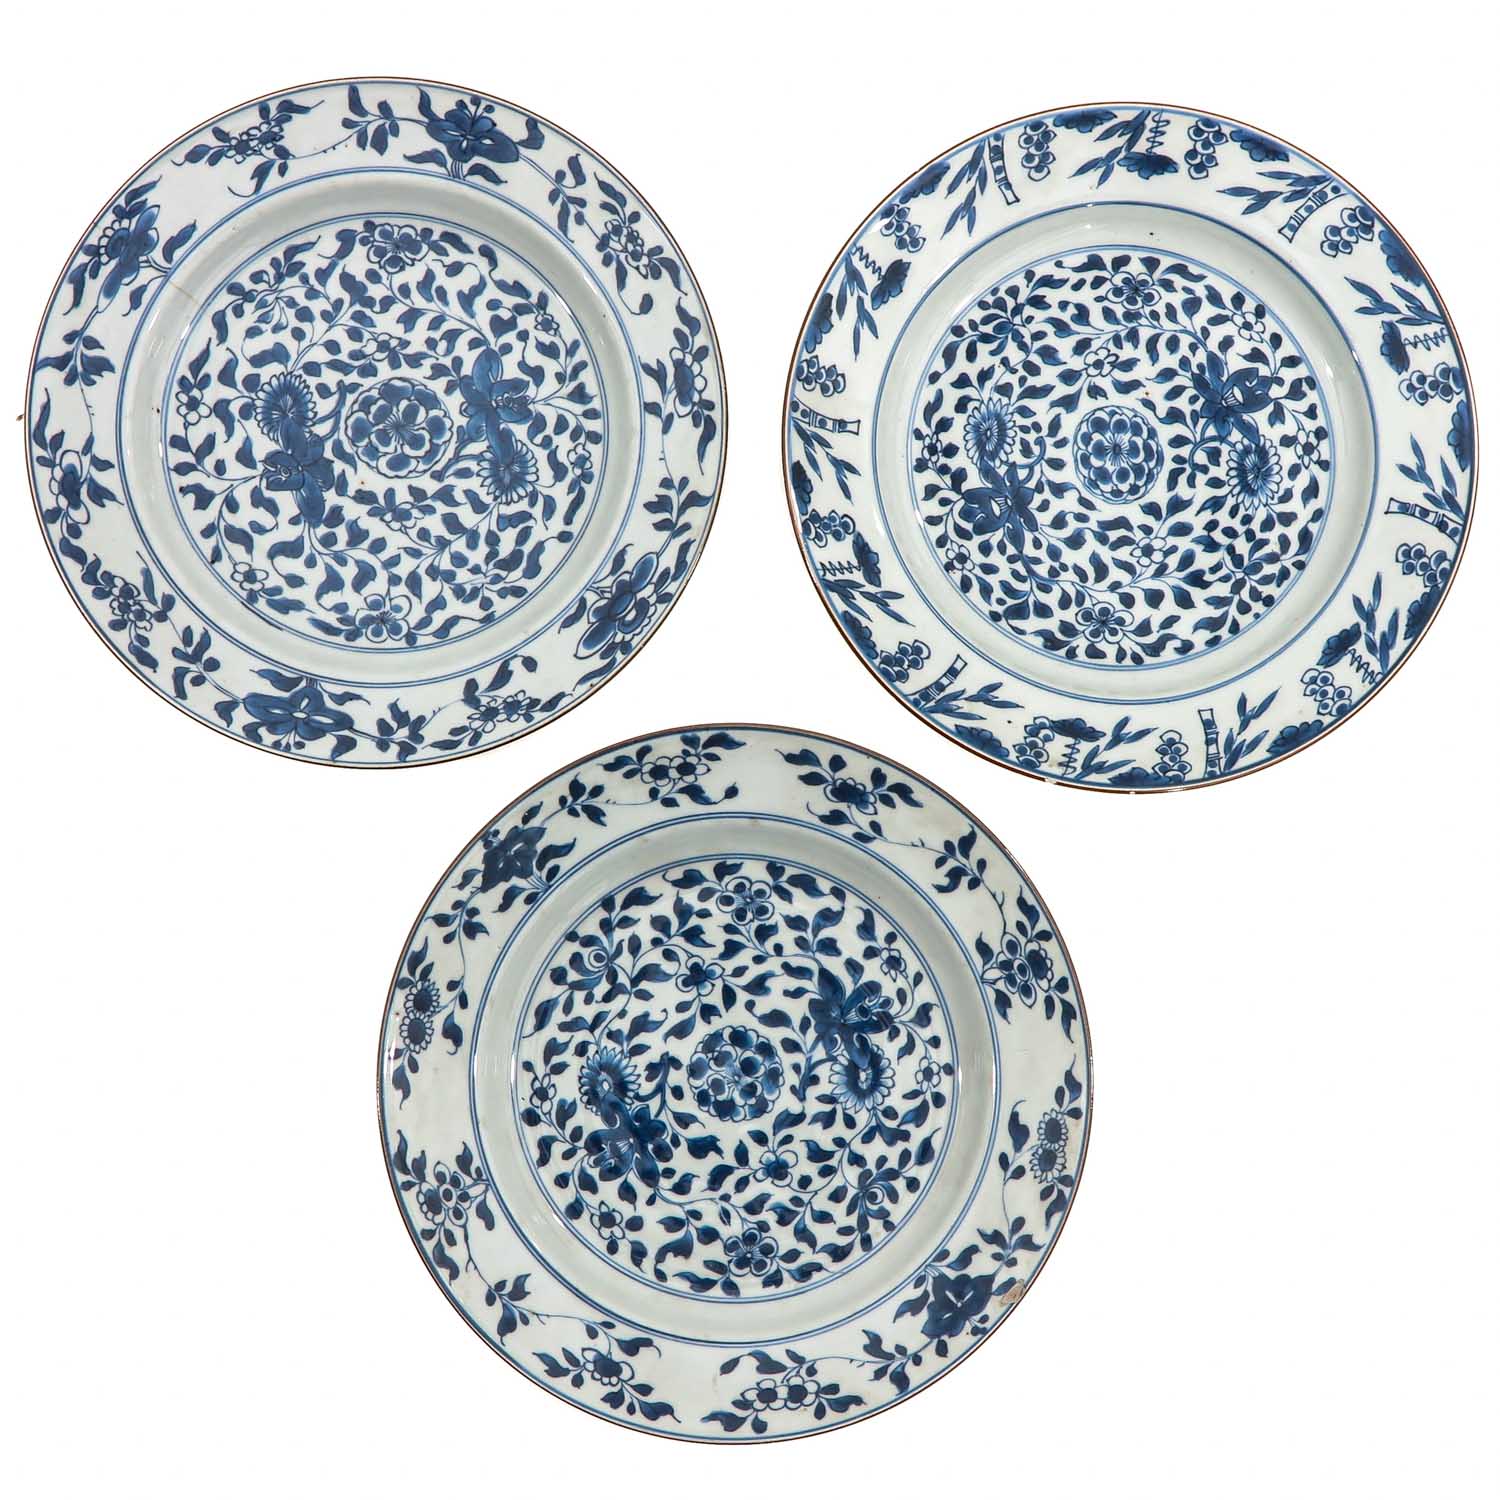 A Series of 9 Blue and White Plates - Image 7 of 10